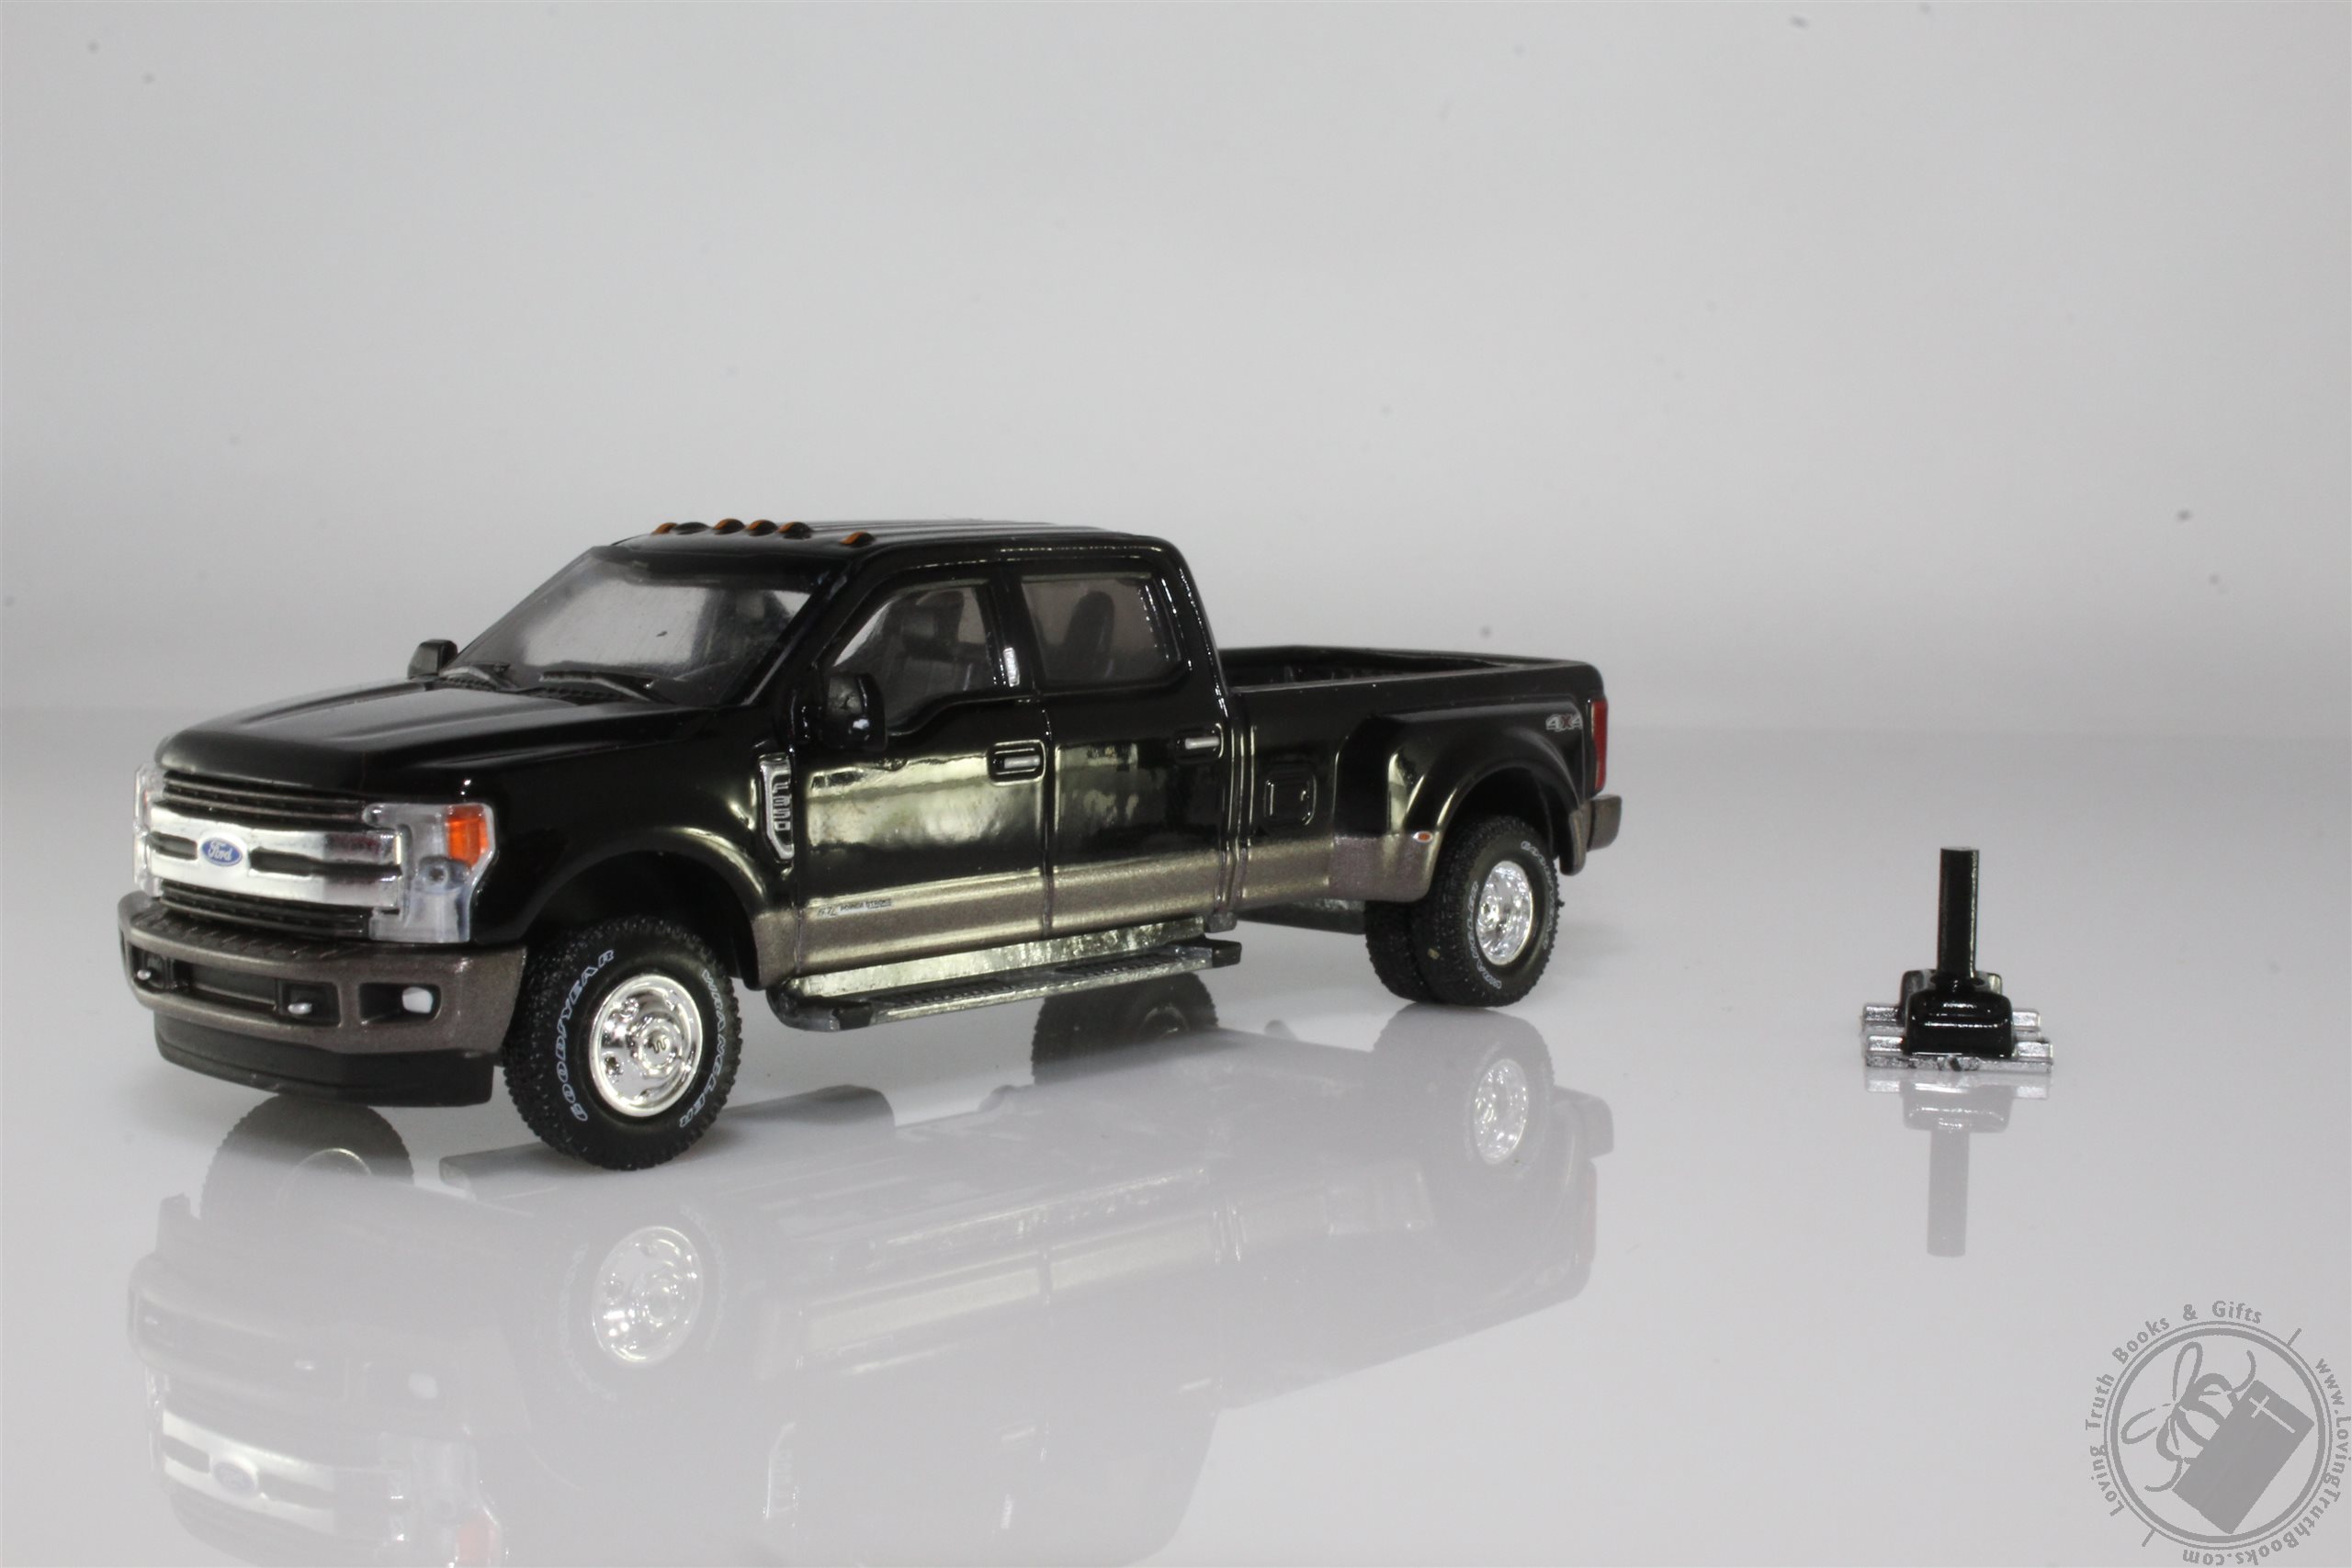 Details about   2019 Ford F-350 Dually King Ranch Pickup Truck 1:64 Scale Diecast Model Black